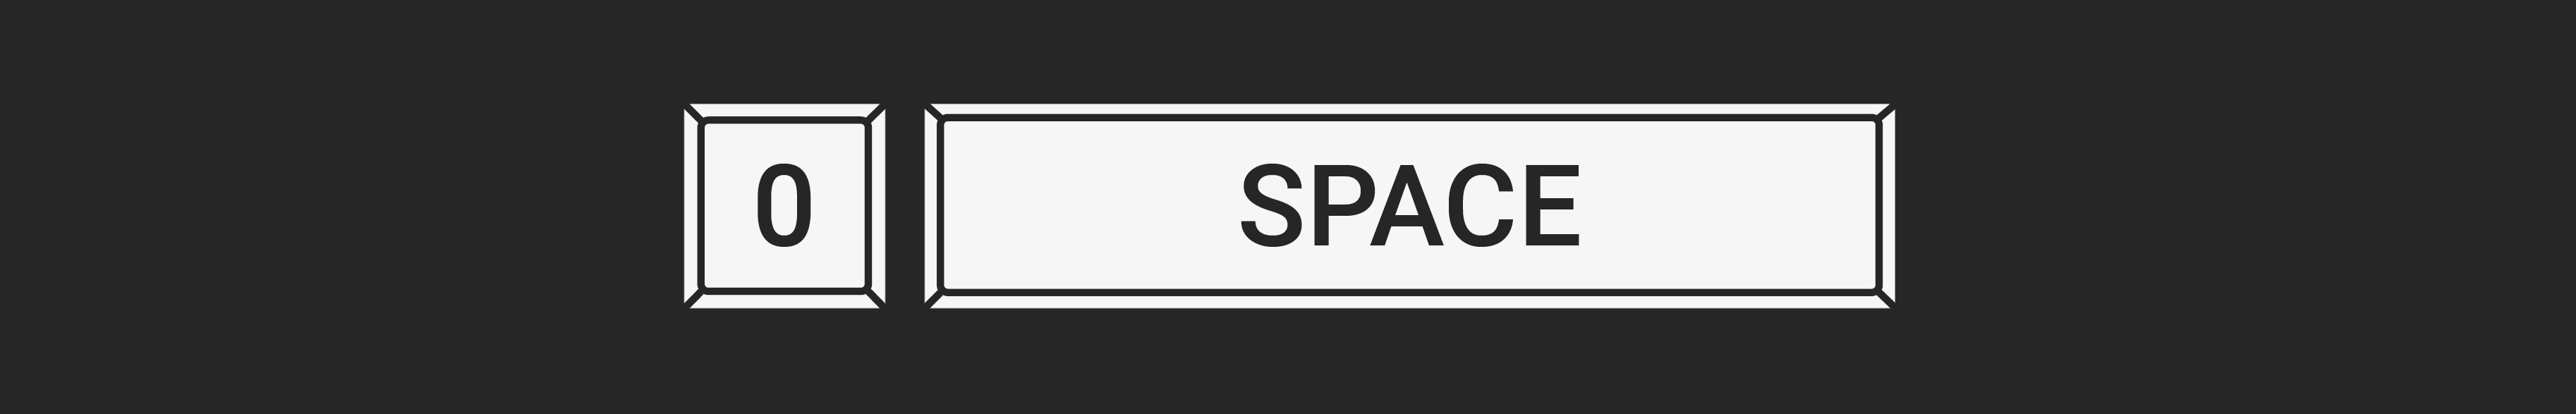 0_Space - itch.io